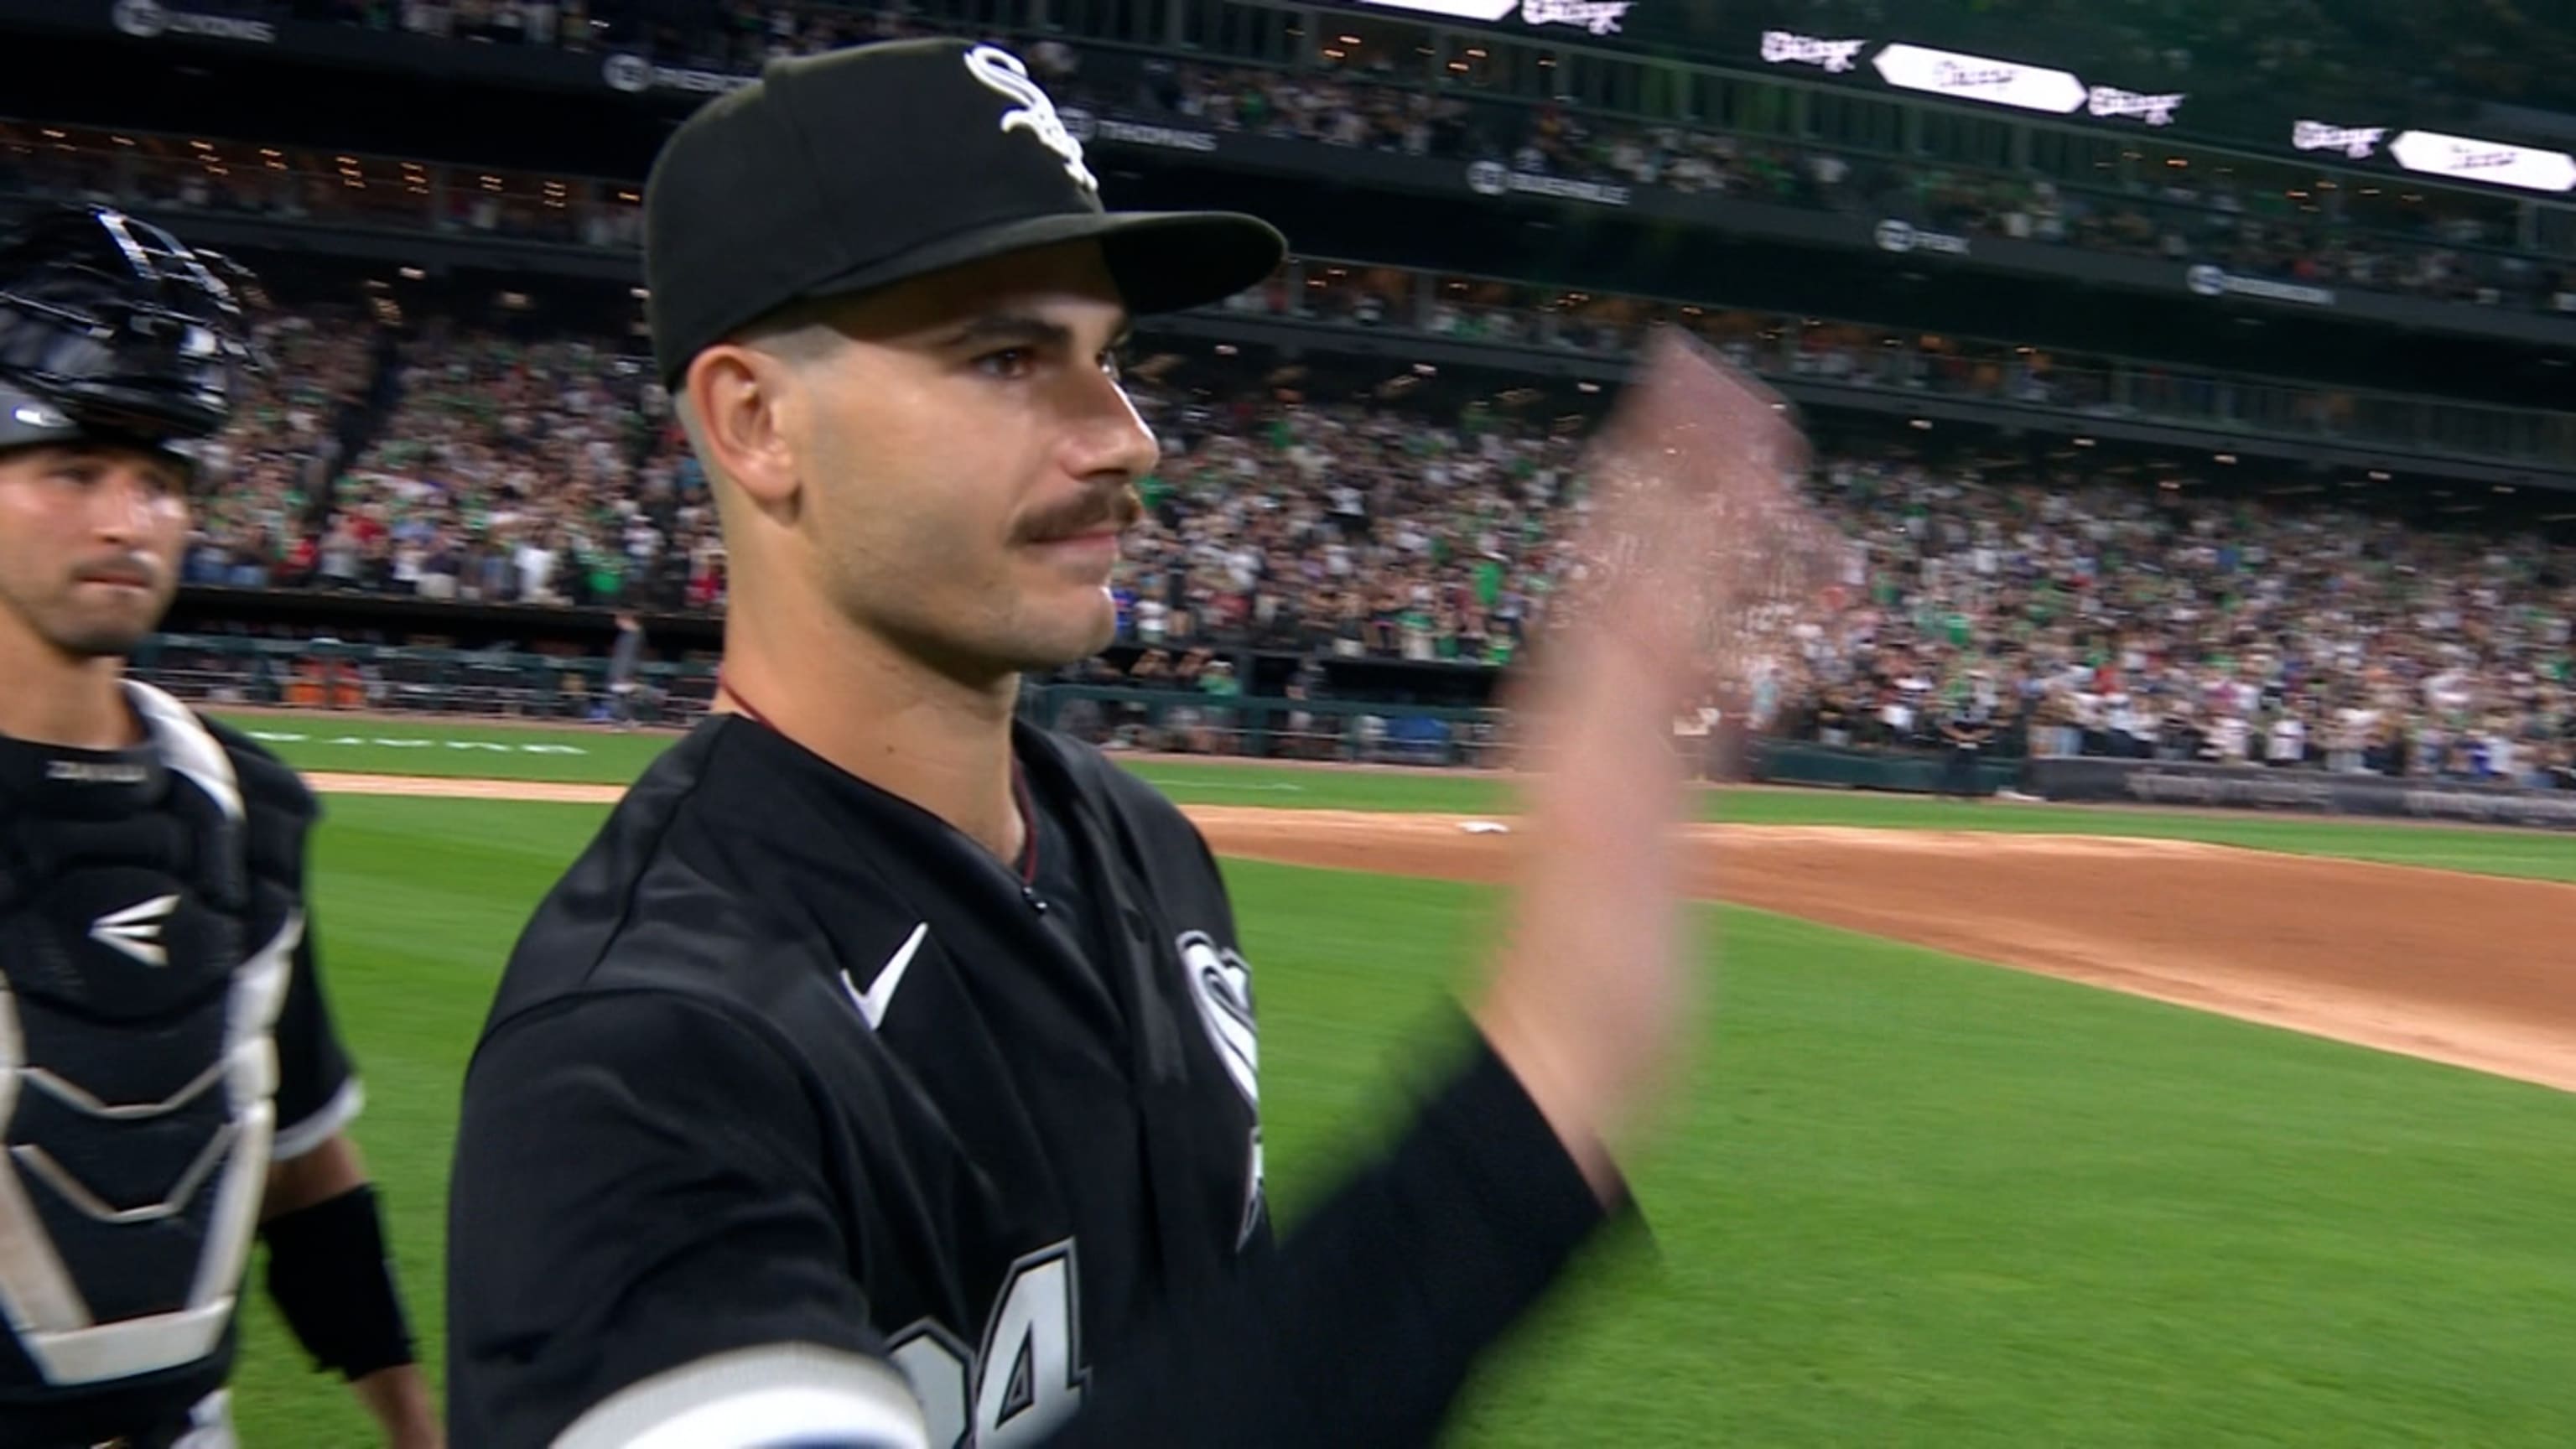 Dylan Cease on his All-Star Game snub, the Cy Young race and his